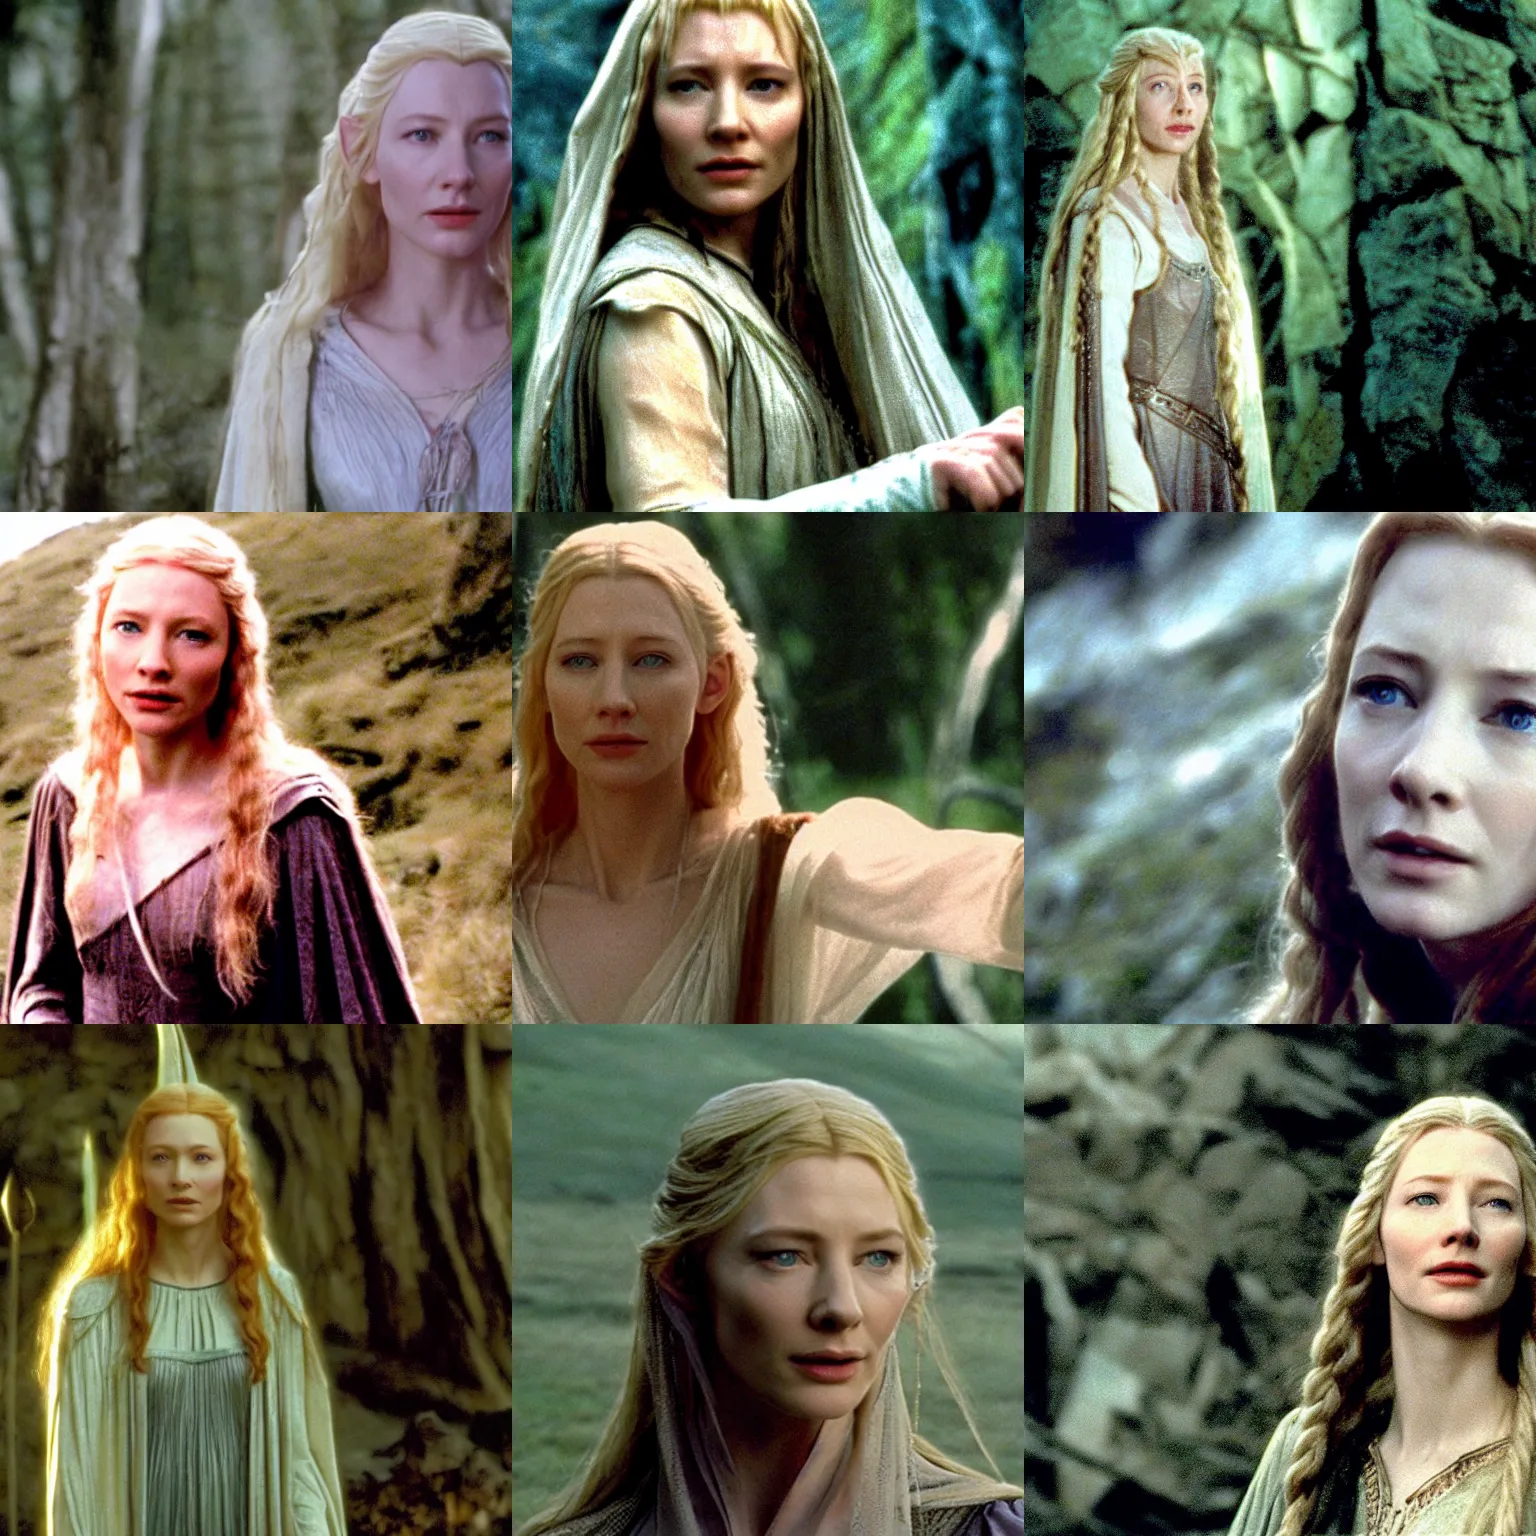 Prompt: galadriel ( young cate blanchett ) in a scene of lord of the rings ( 2 0 0 2 ), filmed by andrew lesnie with arriflex 4 3 5 camera